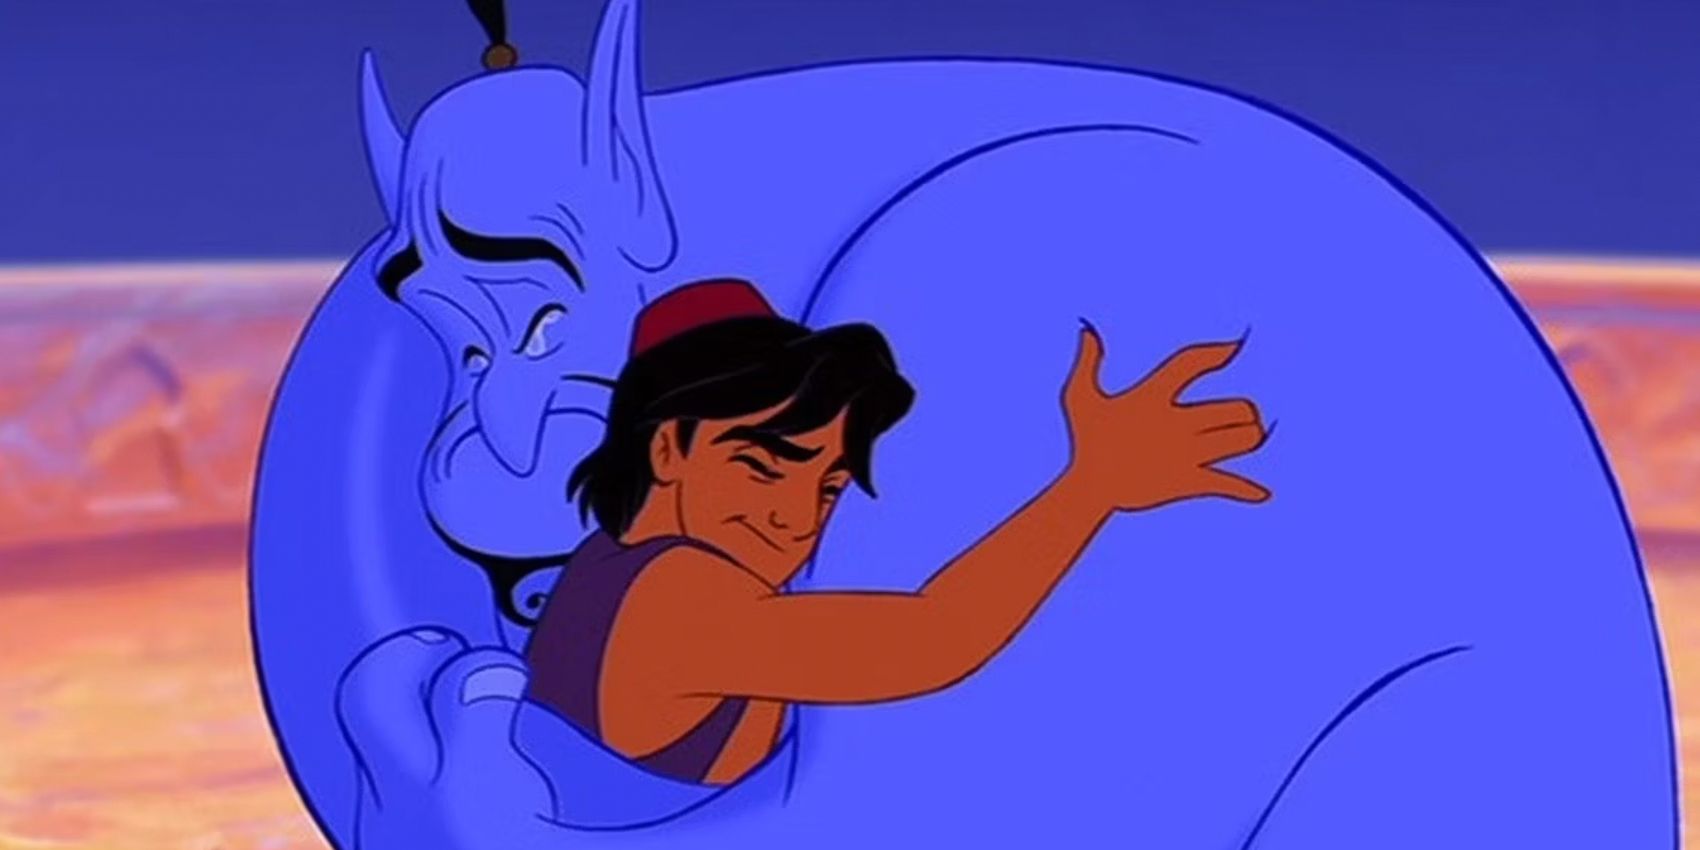 Scott Weinger as Aladdin and Robin Williams as Genie hug in the animated Aladdin